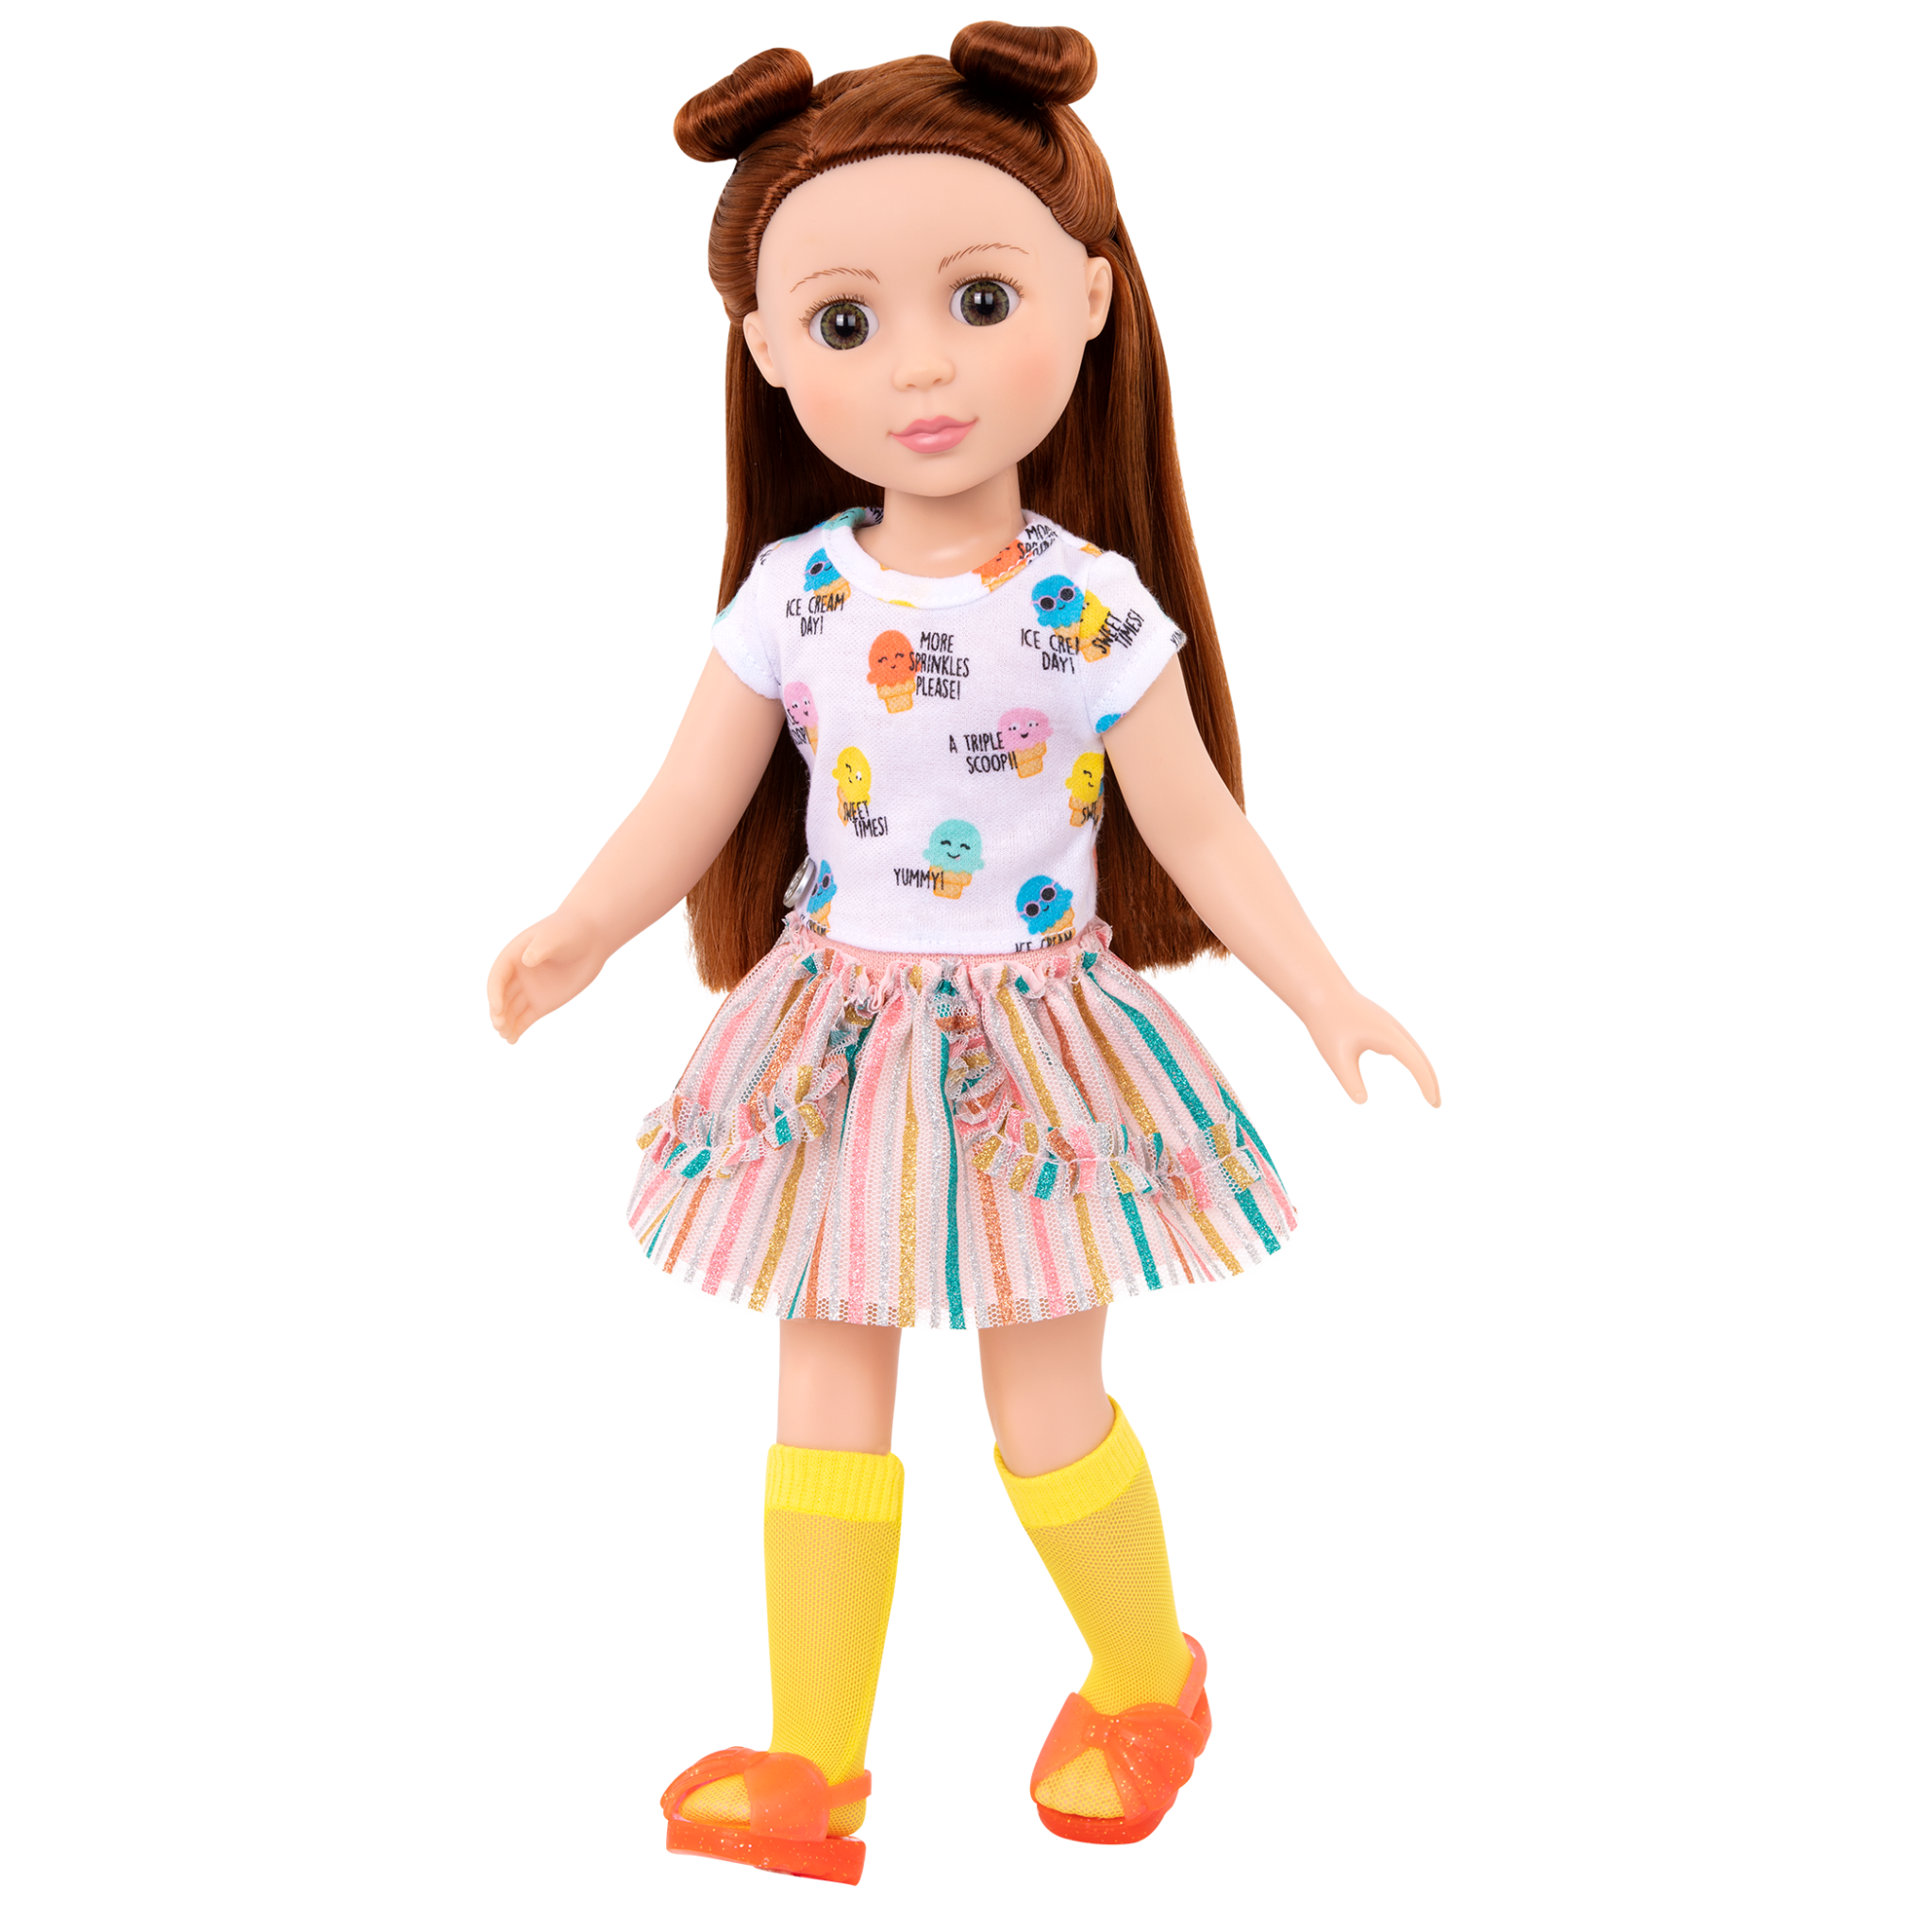 14-inch Fashion Dolls, Outfits & Accessories | Glitter Girls